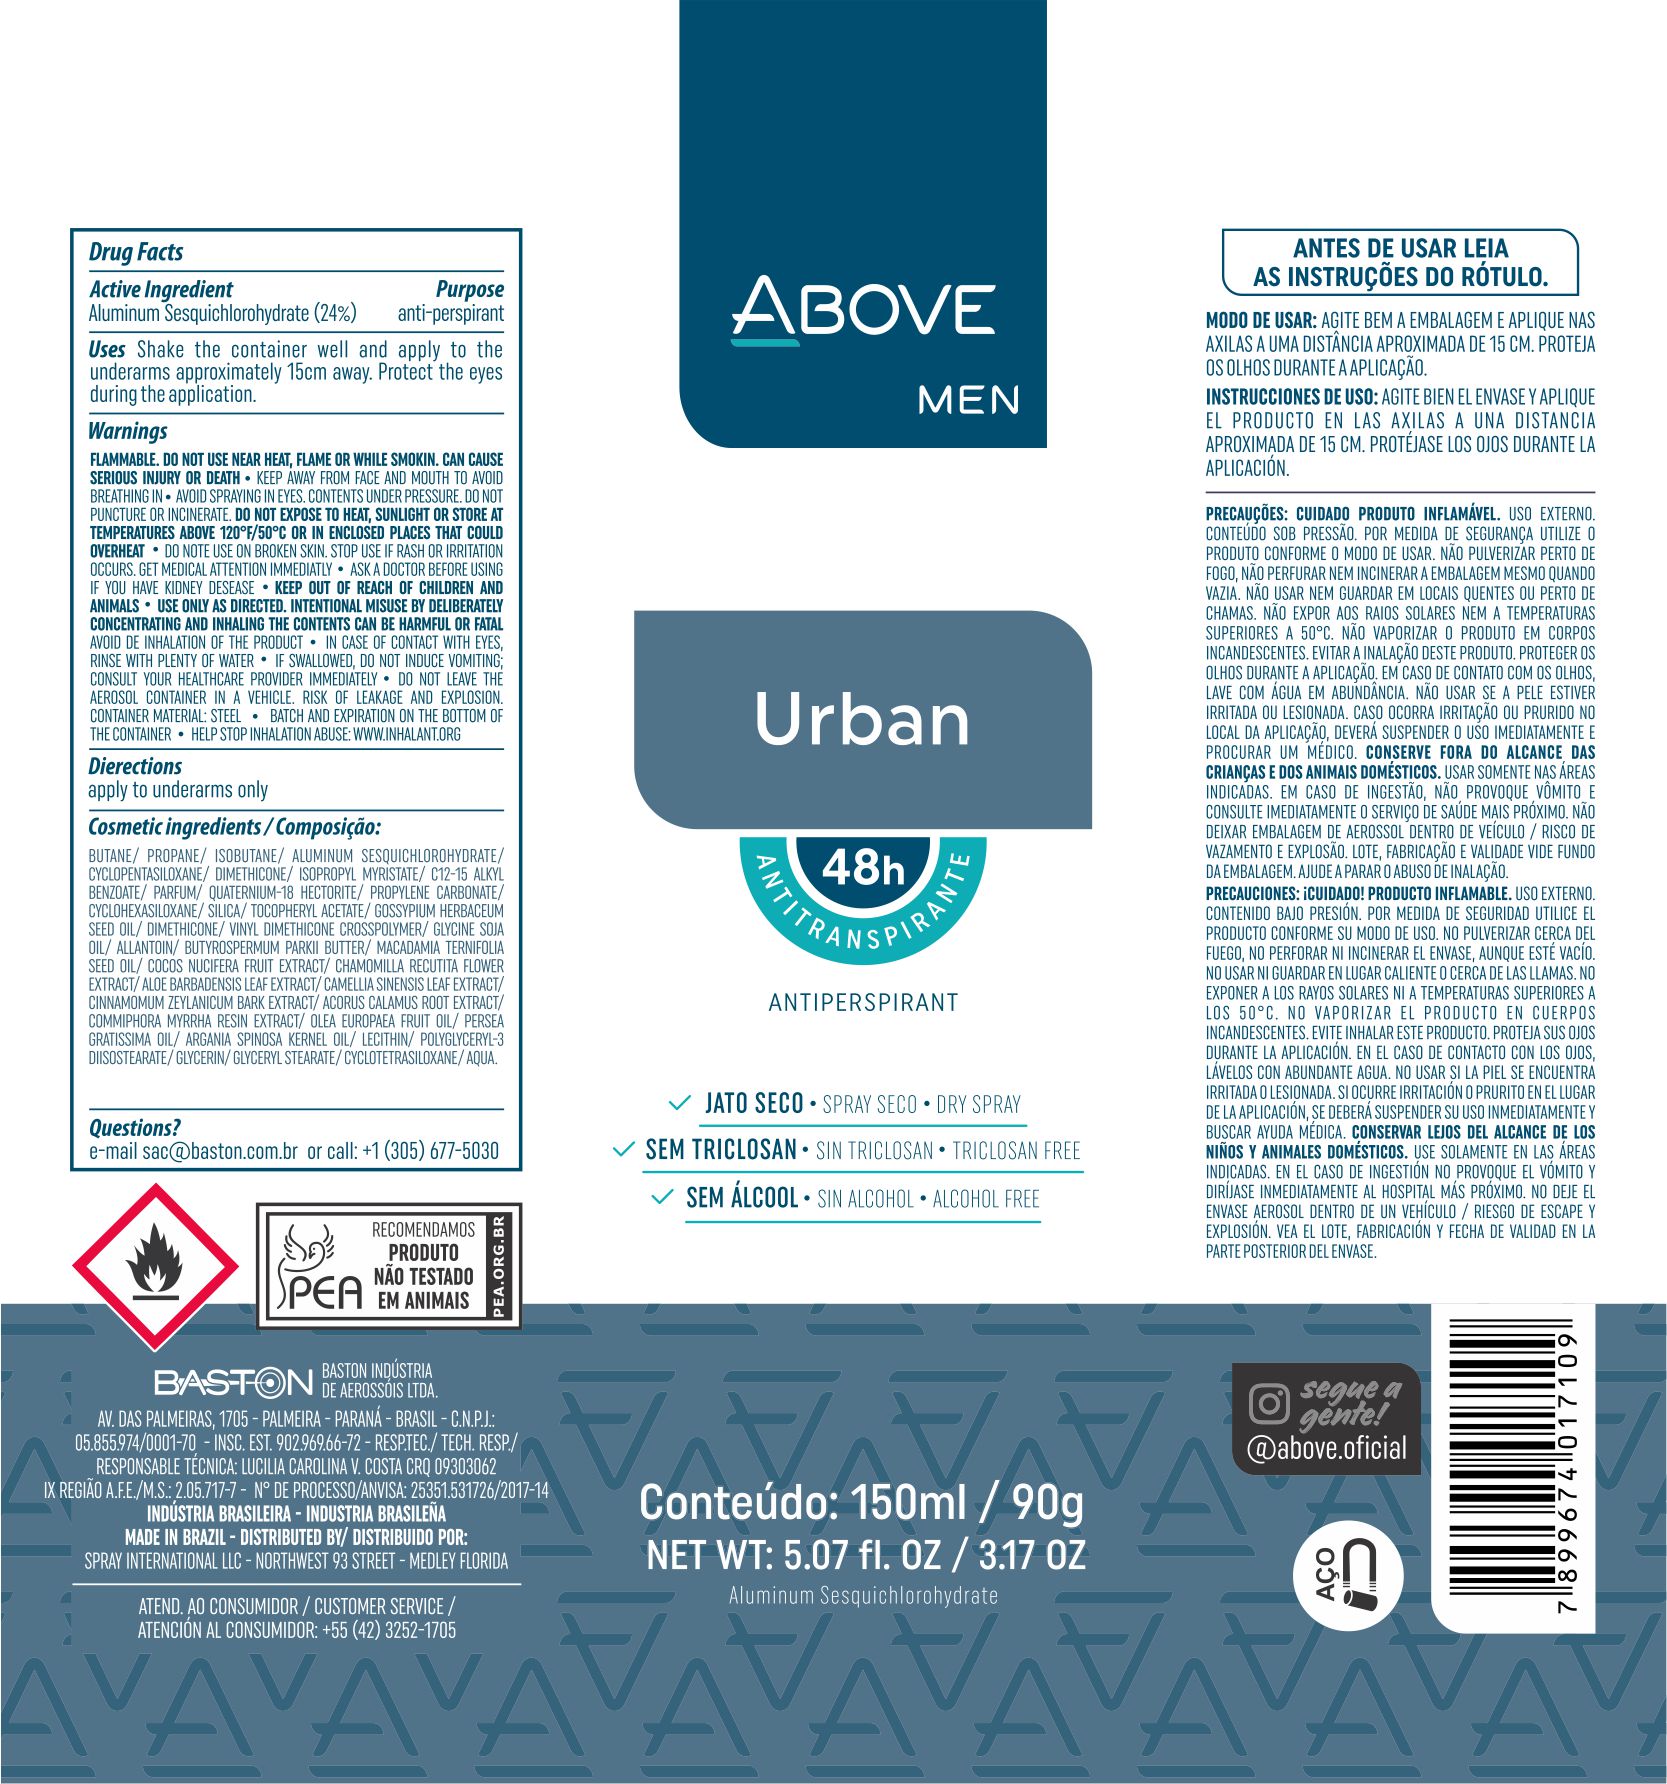 PACKAGE LABEL